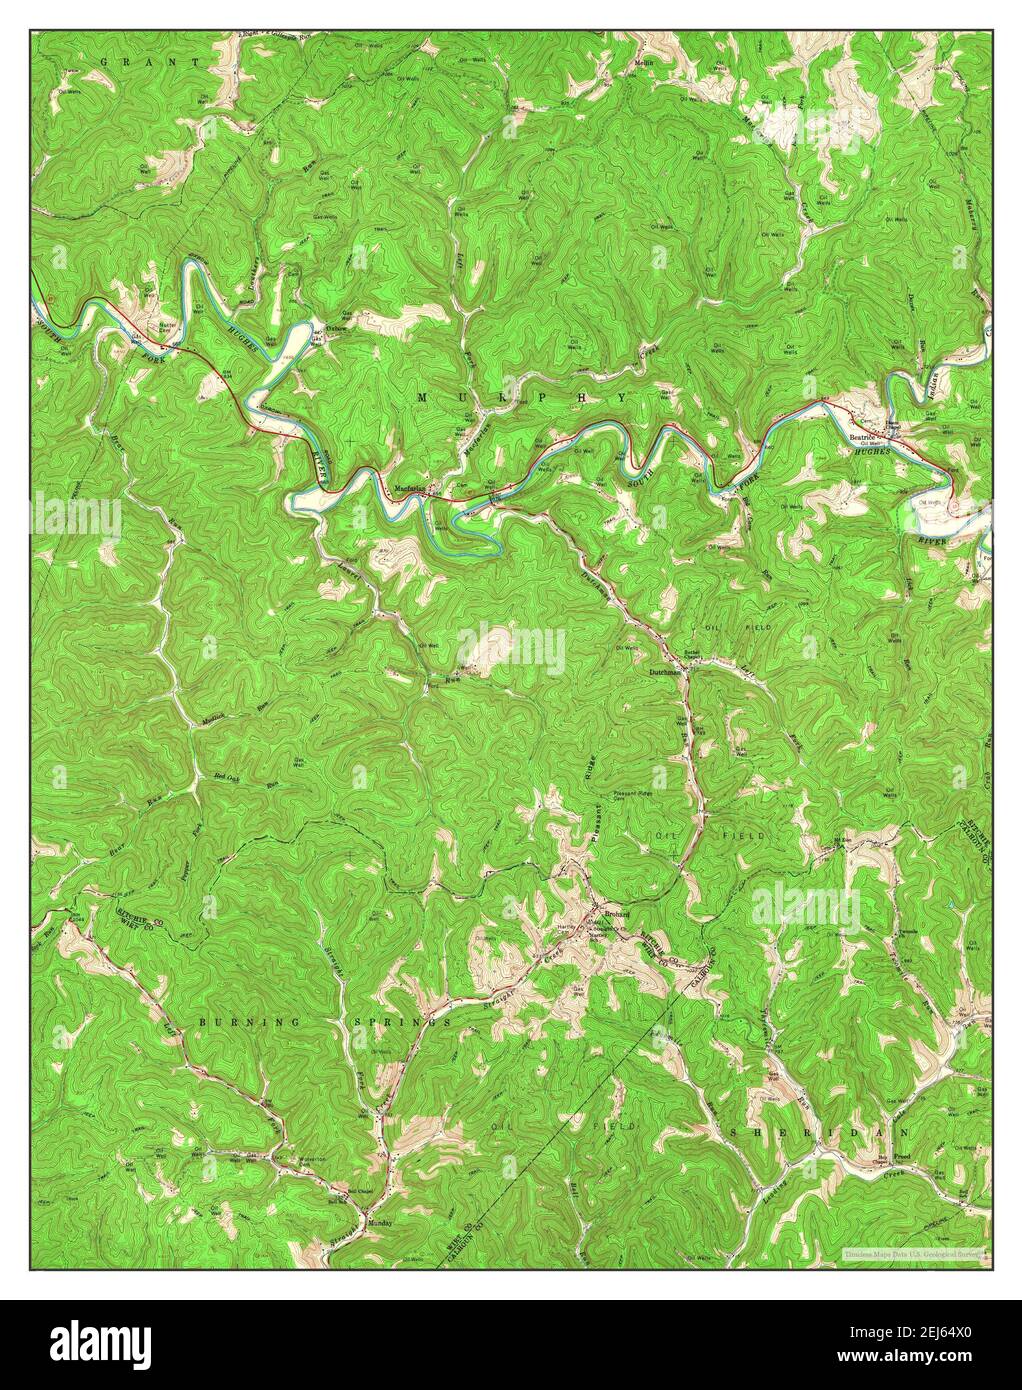 Macfarlan, West Virginia, map 1964, 1:24000, United States of America by Timeless Maps, data U.S. Geological Survey Stock Photo